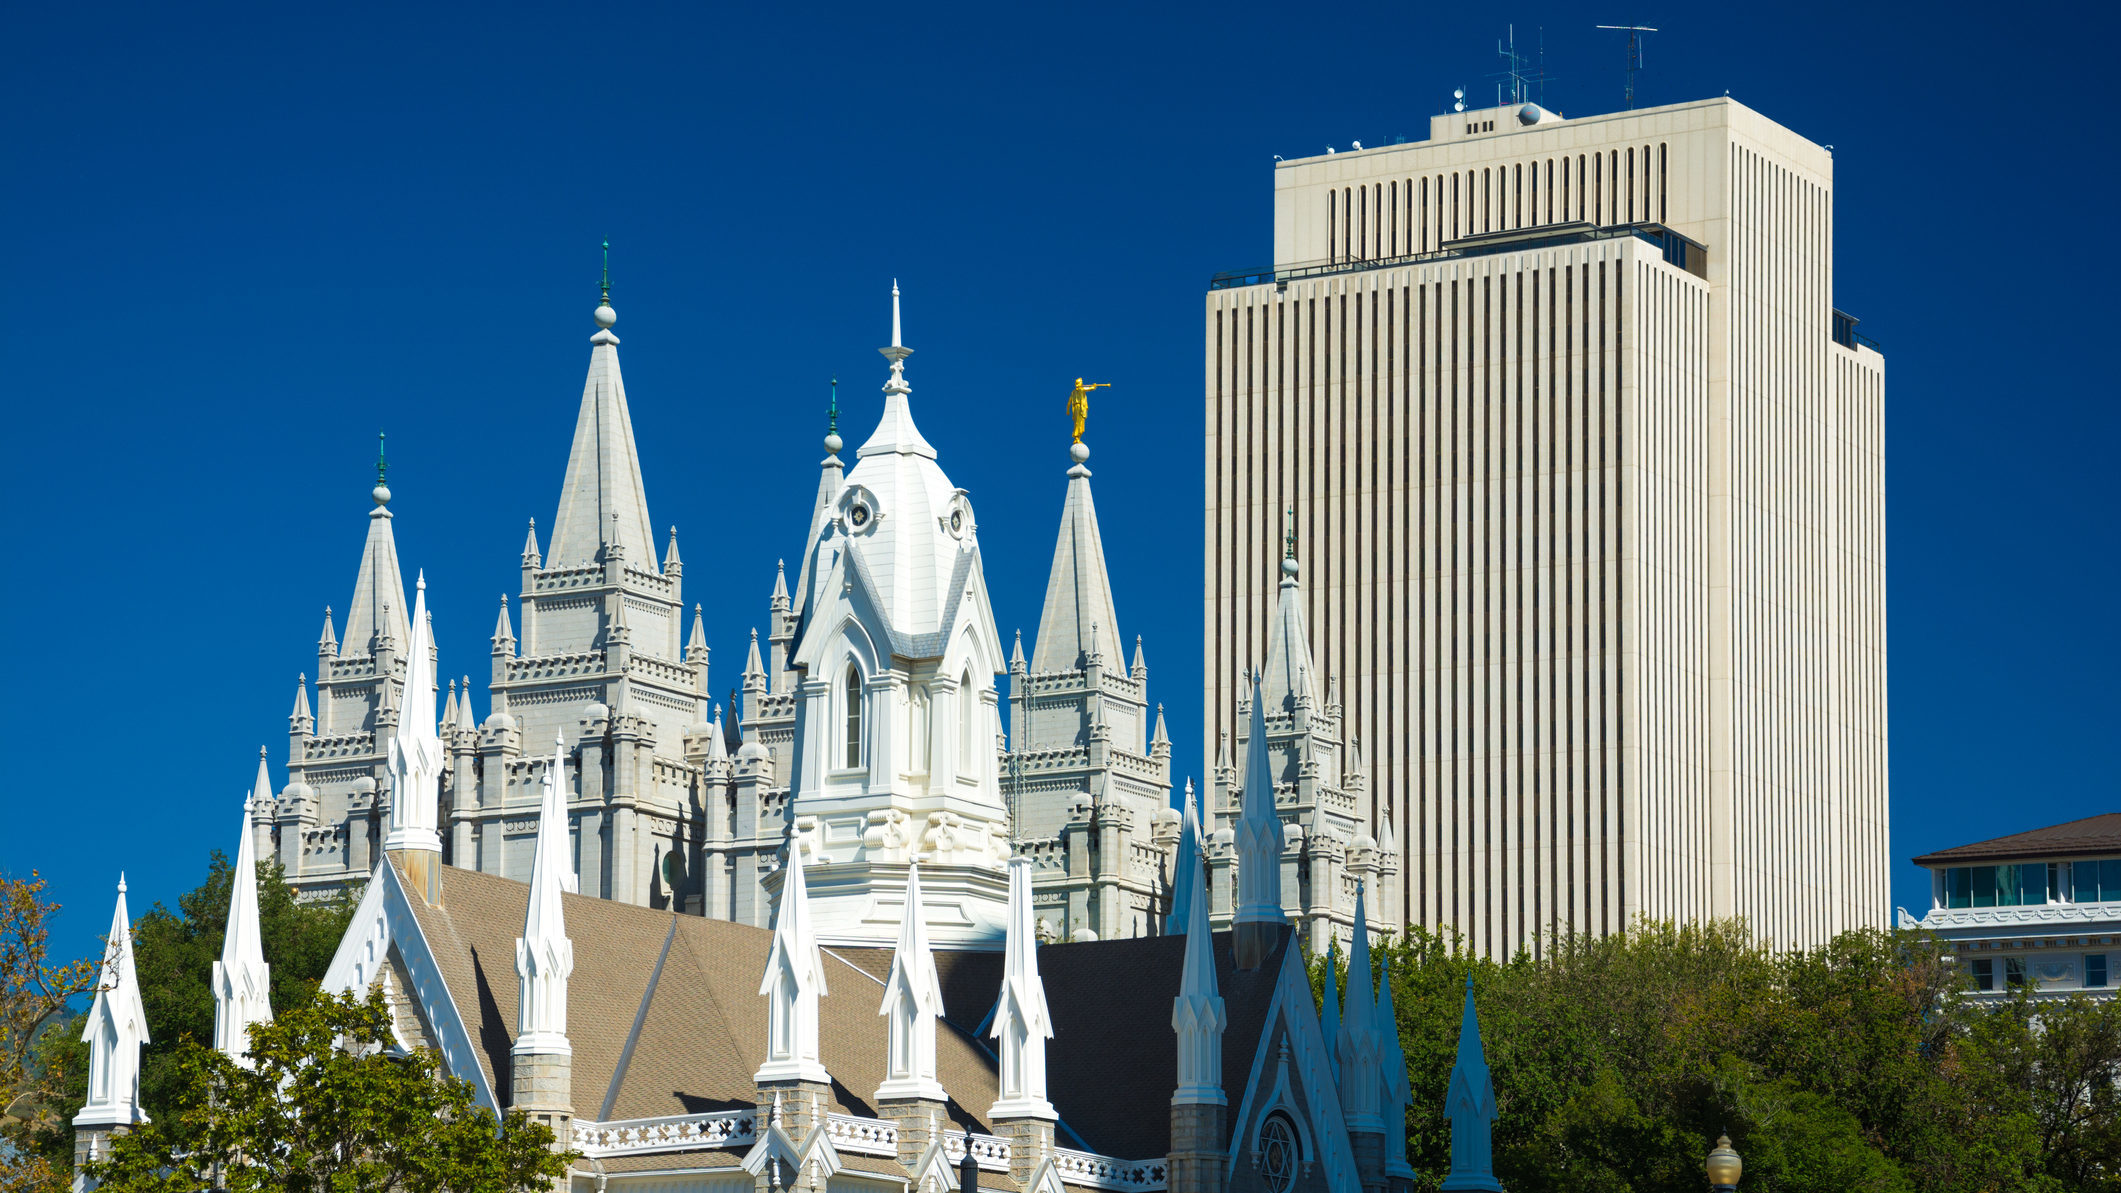 Multiple Church of Jesus Christ of Latter-day Saints buildings are featured in the photo. The churc...